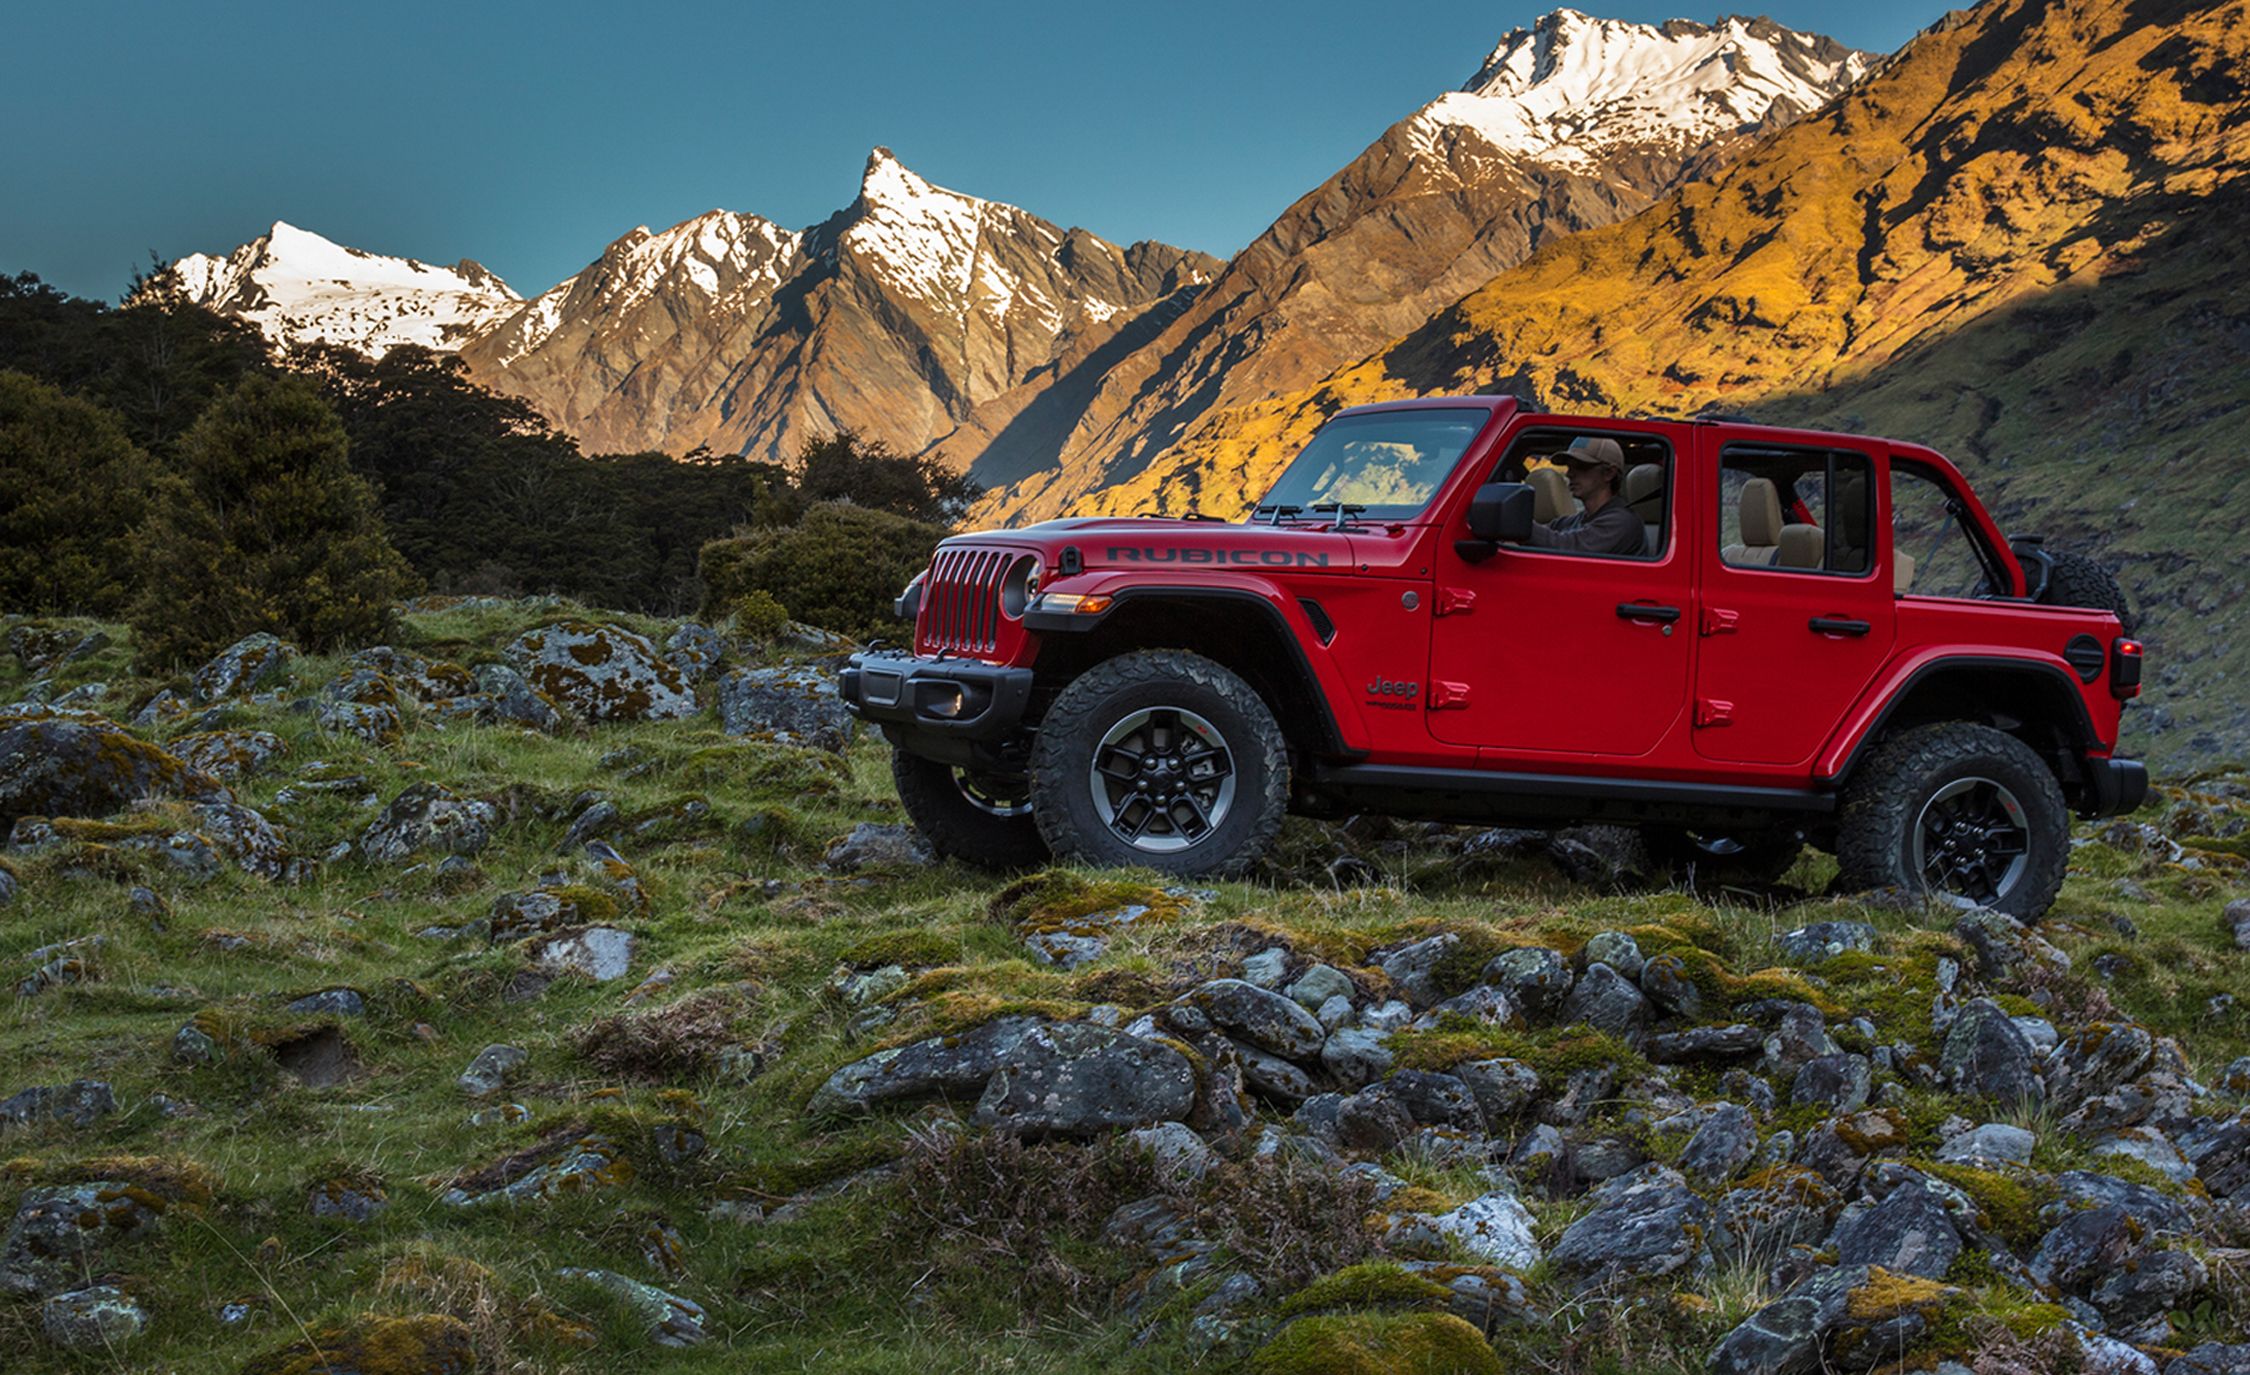 https://hips.hearstapps.com/hmg-prod/amv-prod-cad-assets/images/17q4/692996/2018-jeep-wrangler-jl-finally-unveiled-all-the-details-all-the-photos-news-car-and-driver-photo-695716-s-original.jpg